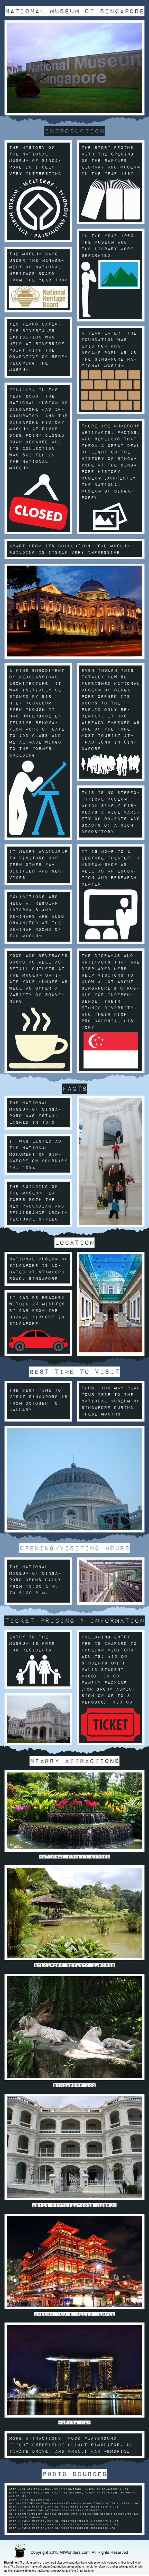 National Museum of Singapore Infographic